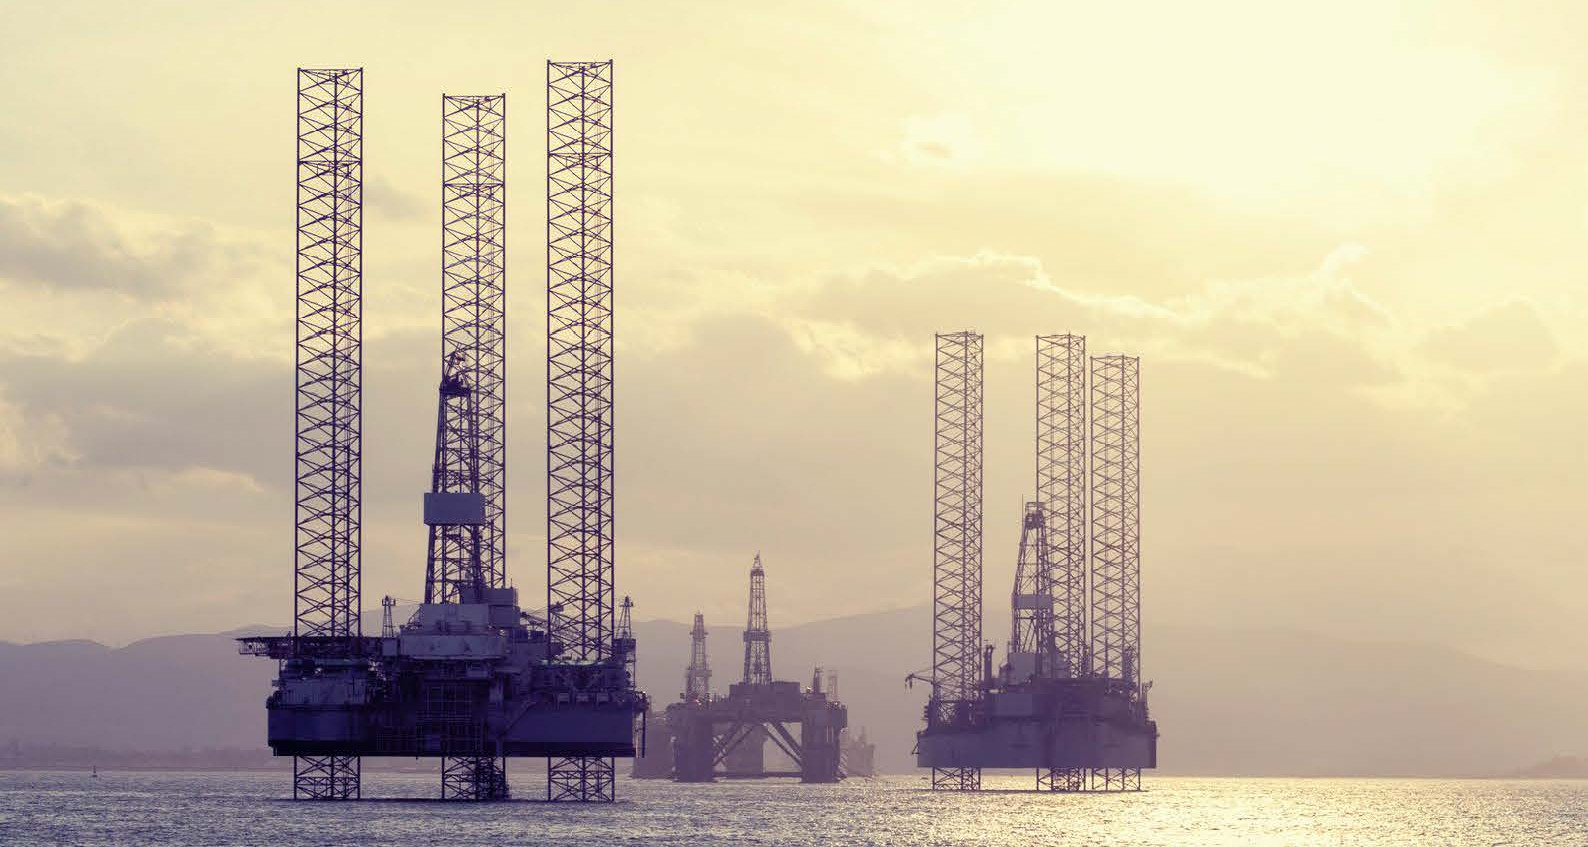 Offshore oil drilling platforms stand in a tranquil sea with soft golden sunlight